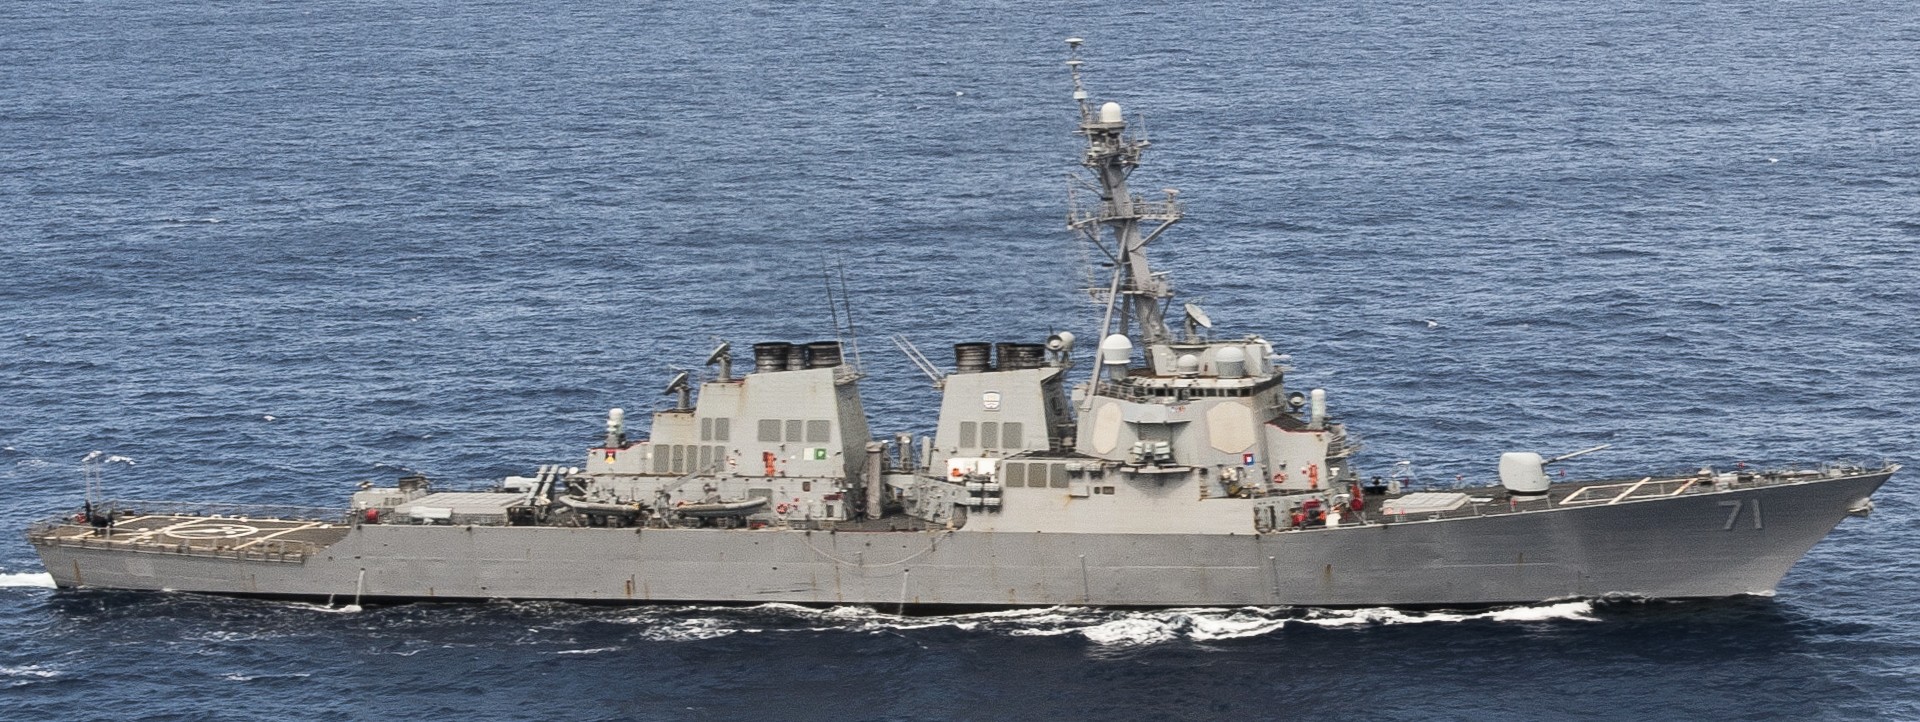 ddg-71 uss ross guided missile destroyer arleigh burke class aegis bmd 72